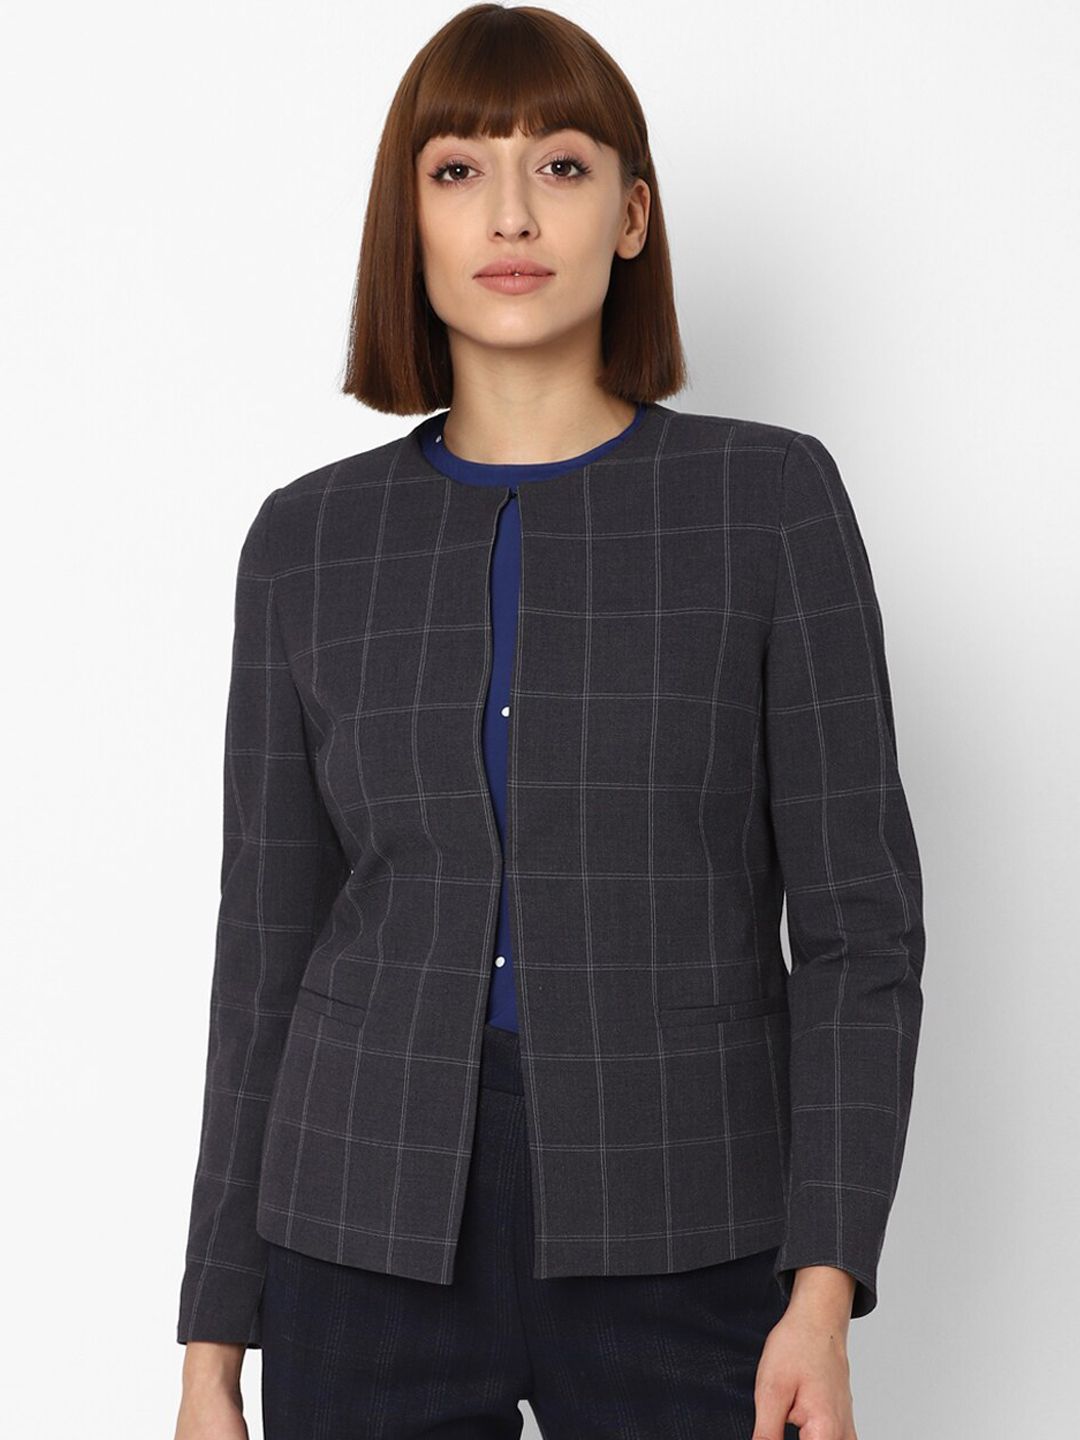 Allen Solly Woman Women Grey Checked Open-Front Casual Blazer Price in India